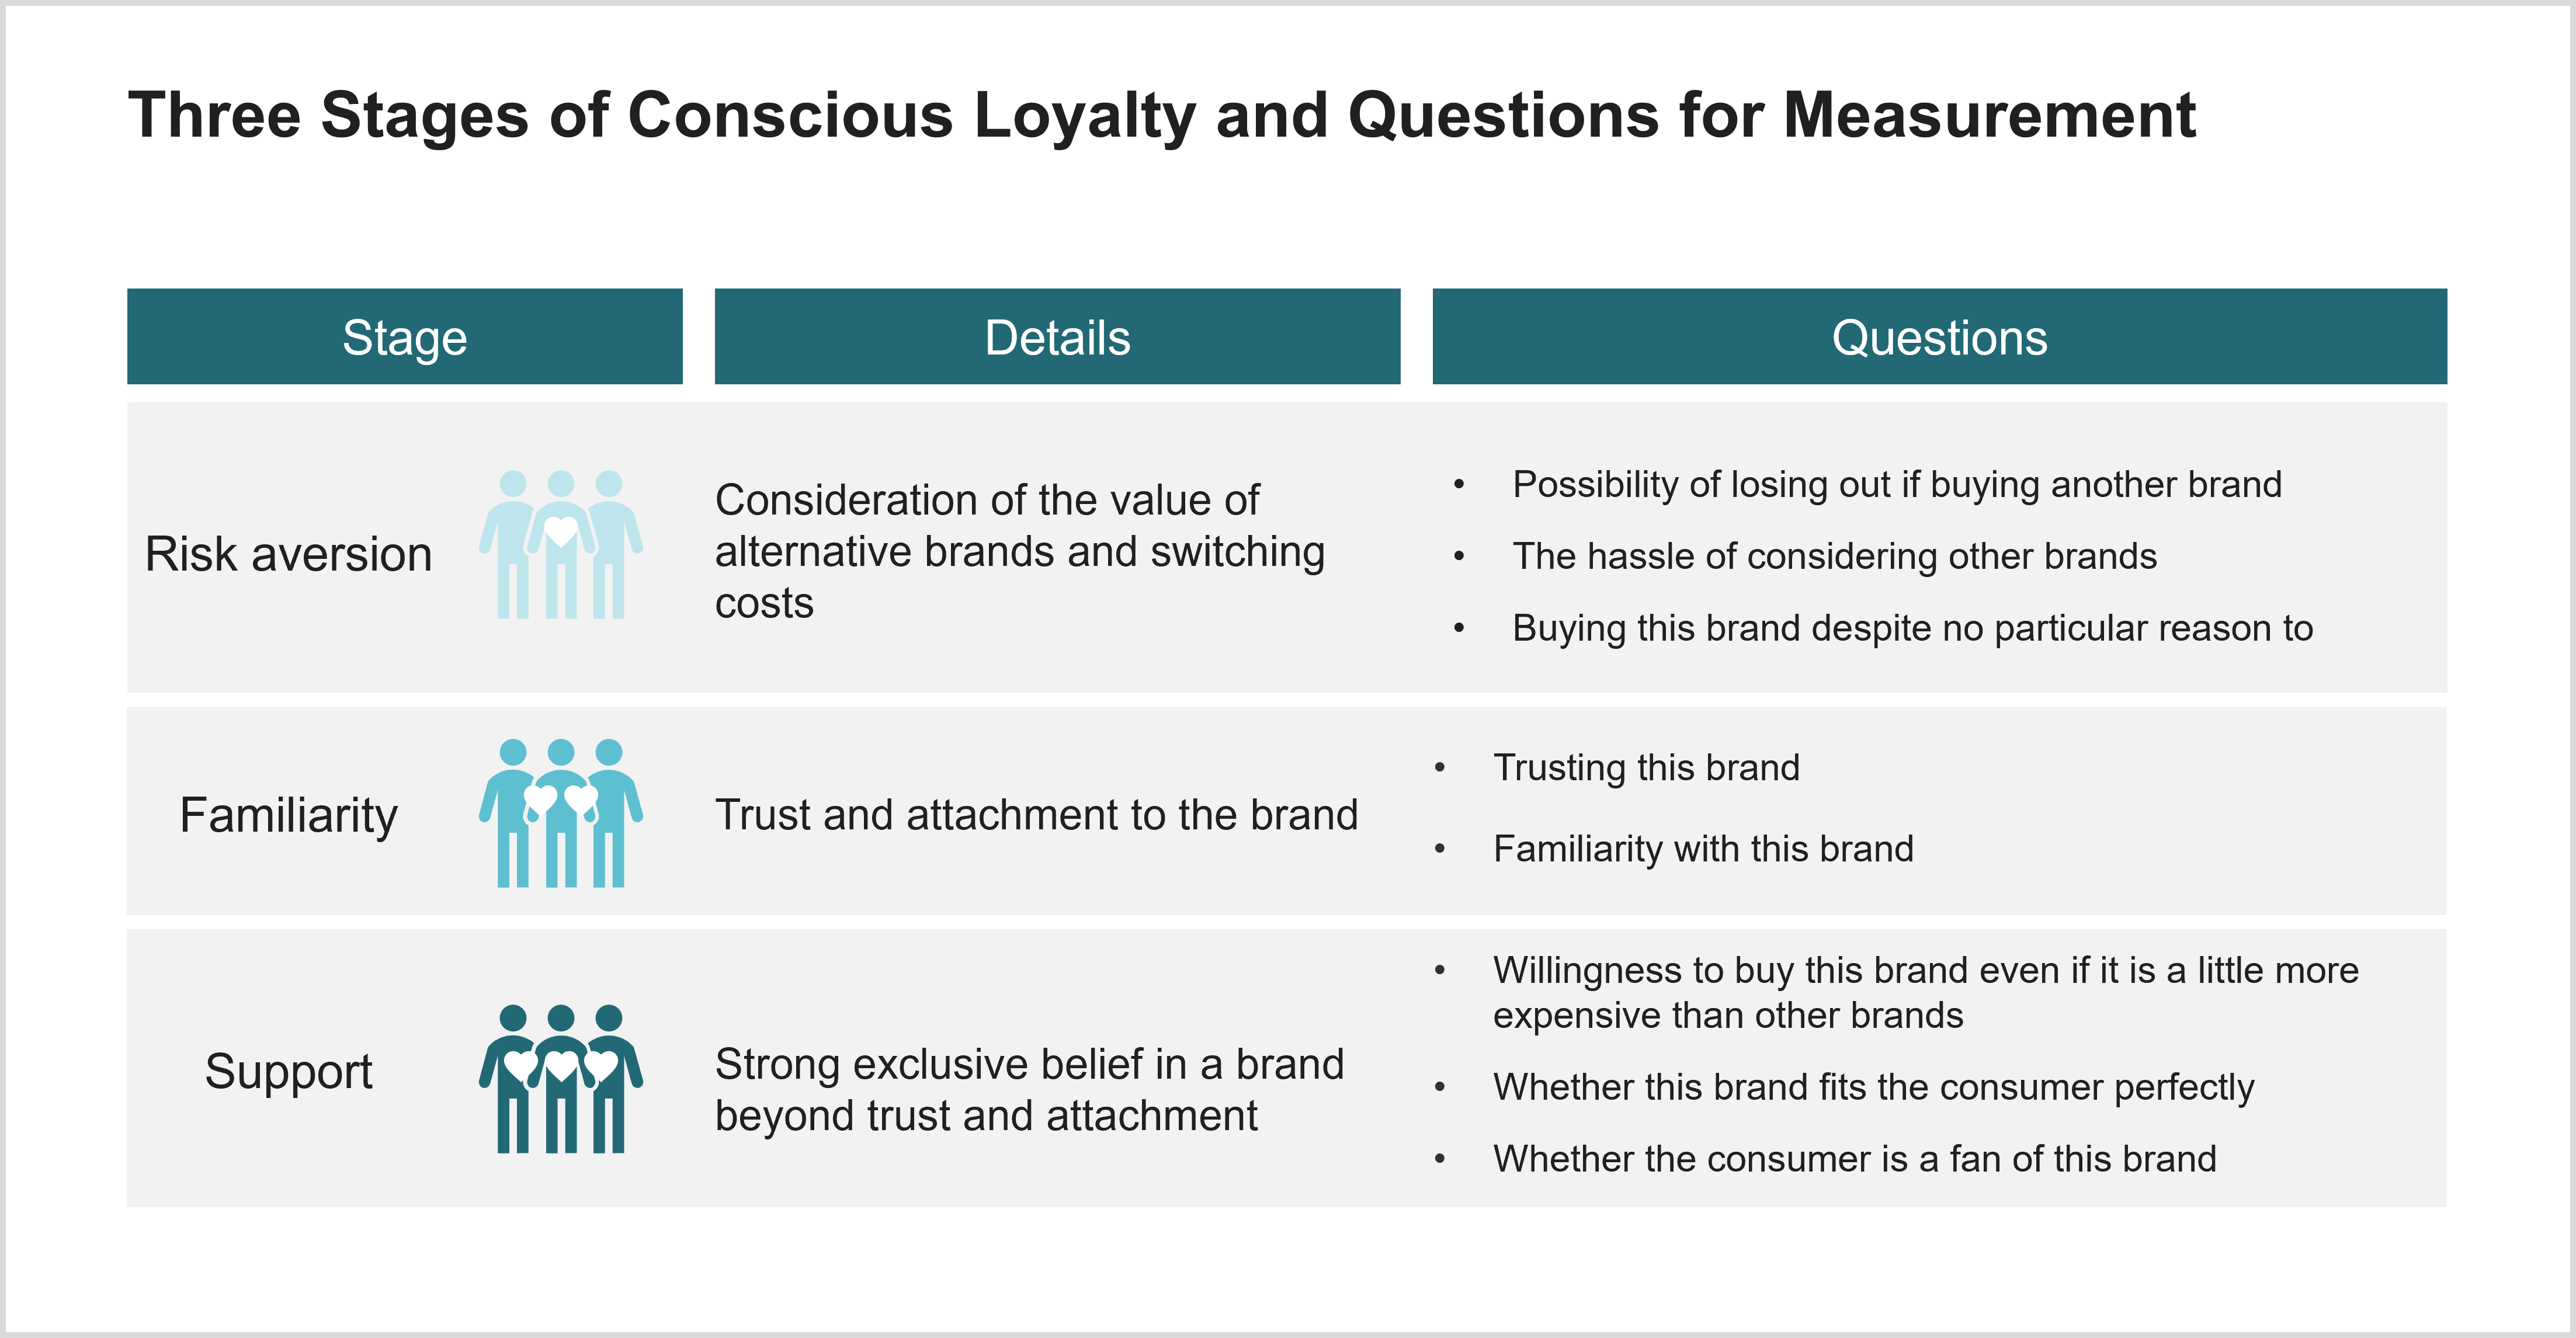 Three Stages of Conscious Loyalty and Questions for Measurement